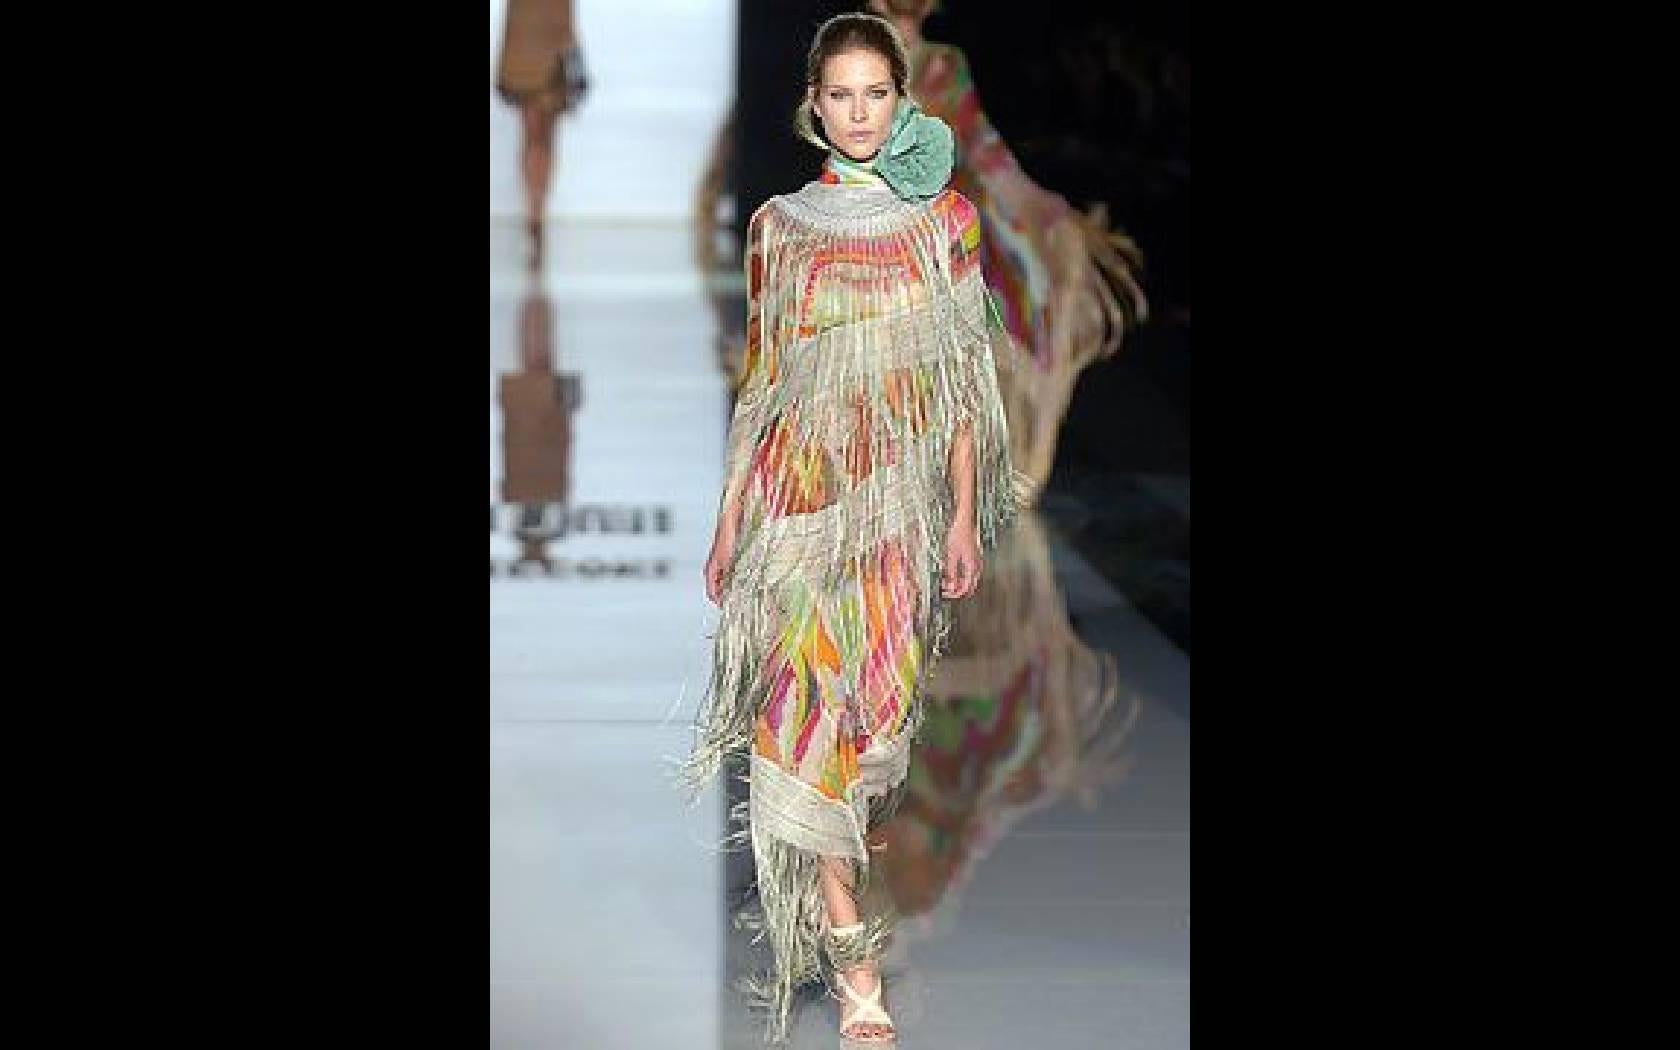 This dress ; a beautiful creation from Missoni, as seen on the runway.
I love the colorful abstract painted print on silk.
Long silk fringe panels. 

Size estimate: S 
Measurements: 
Bust: 32 -34 inches
Waist 30 inches
Hips: 32- 36 inches
Length: 54